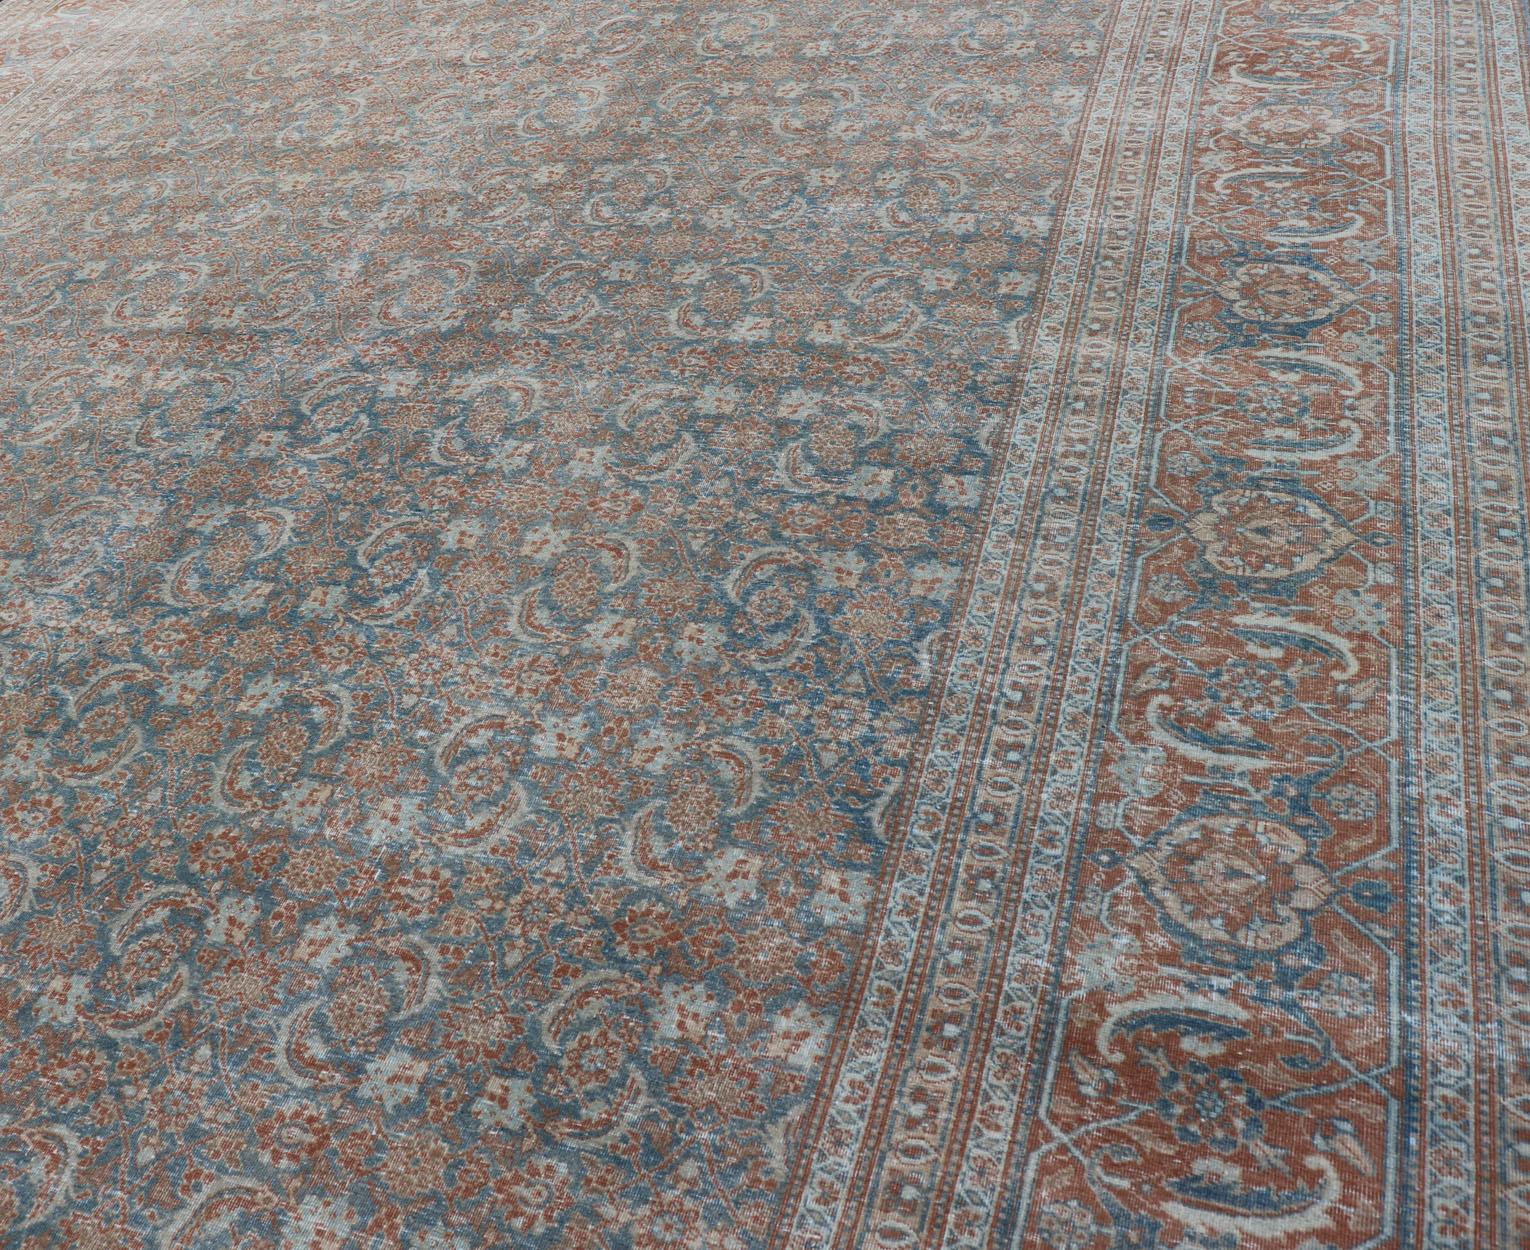 Large Antique Persian Tabriz Carpet with Herati Design in Gray Blue & Orange Red For Sale 1